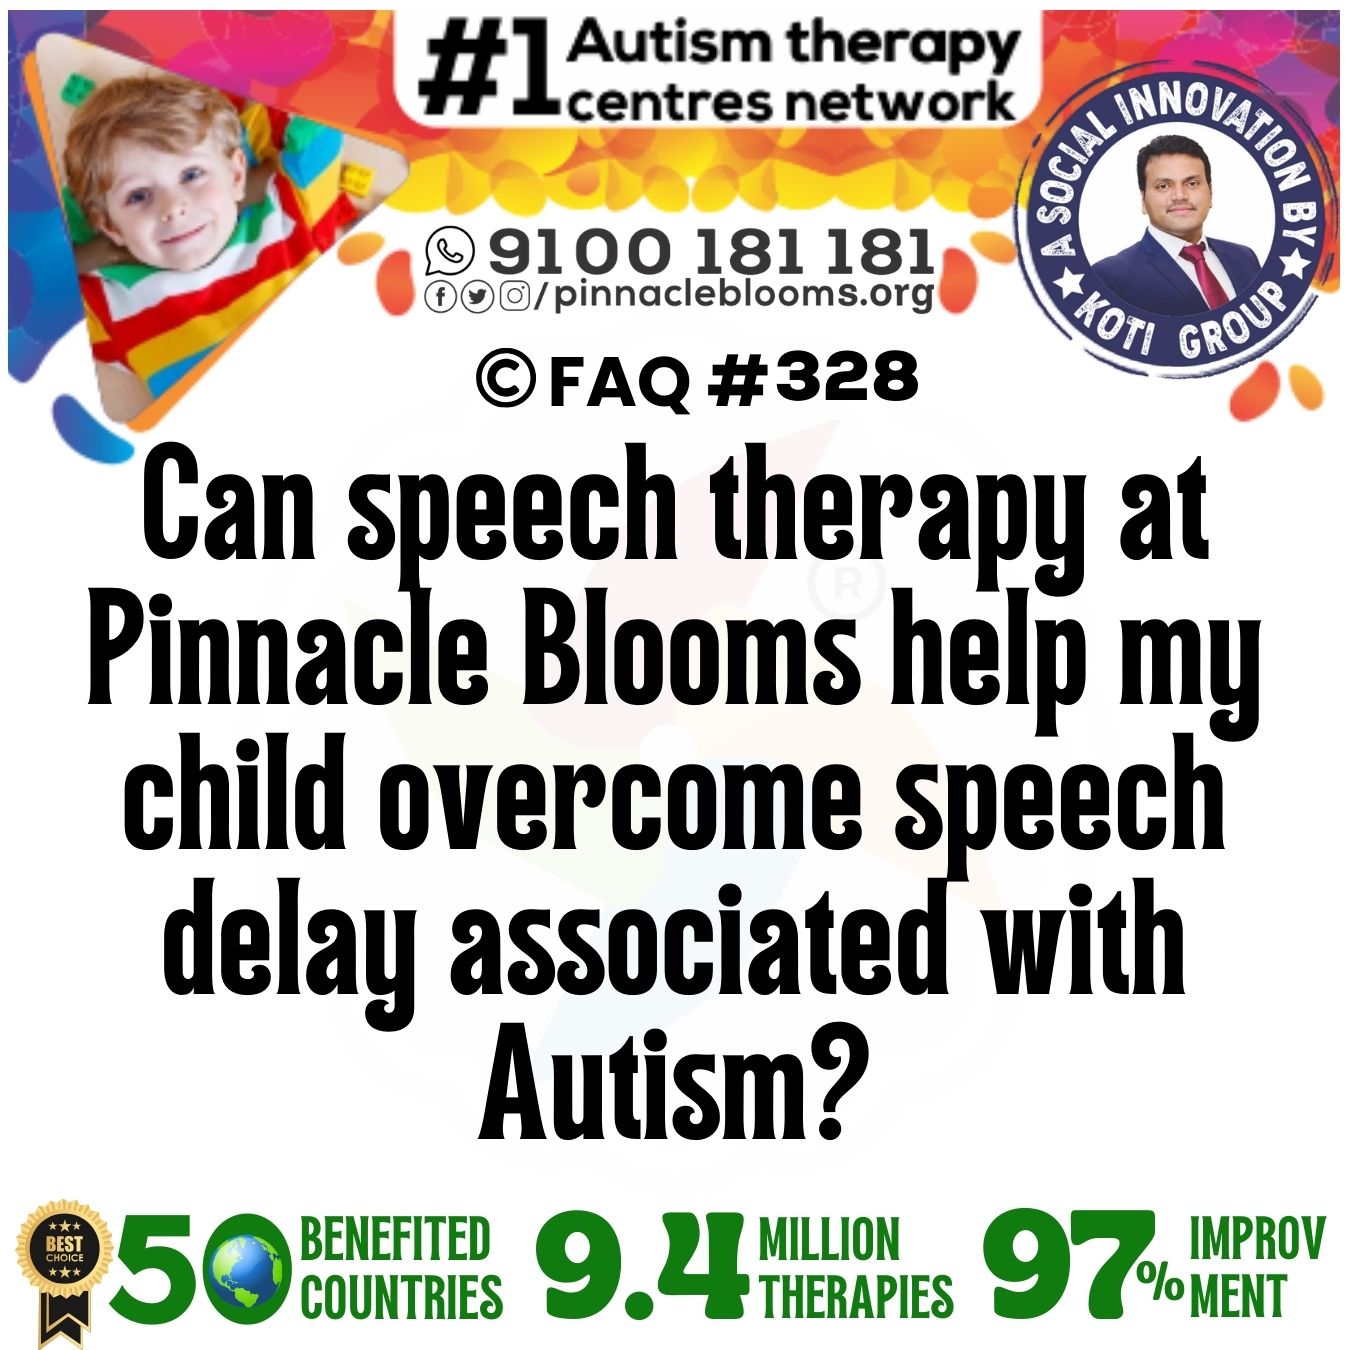 Can speech therapy at Pinnacle Blooms help my child overcome speech delay associated with Autism?